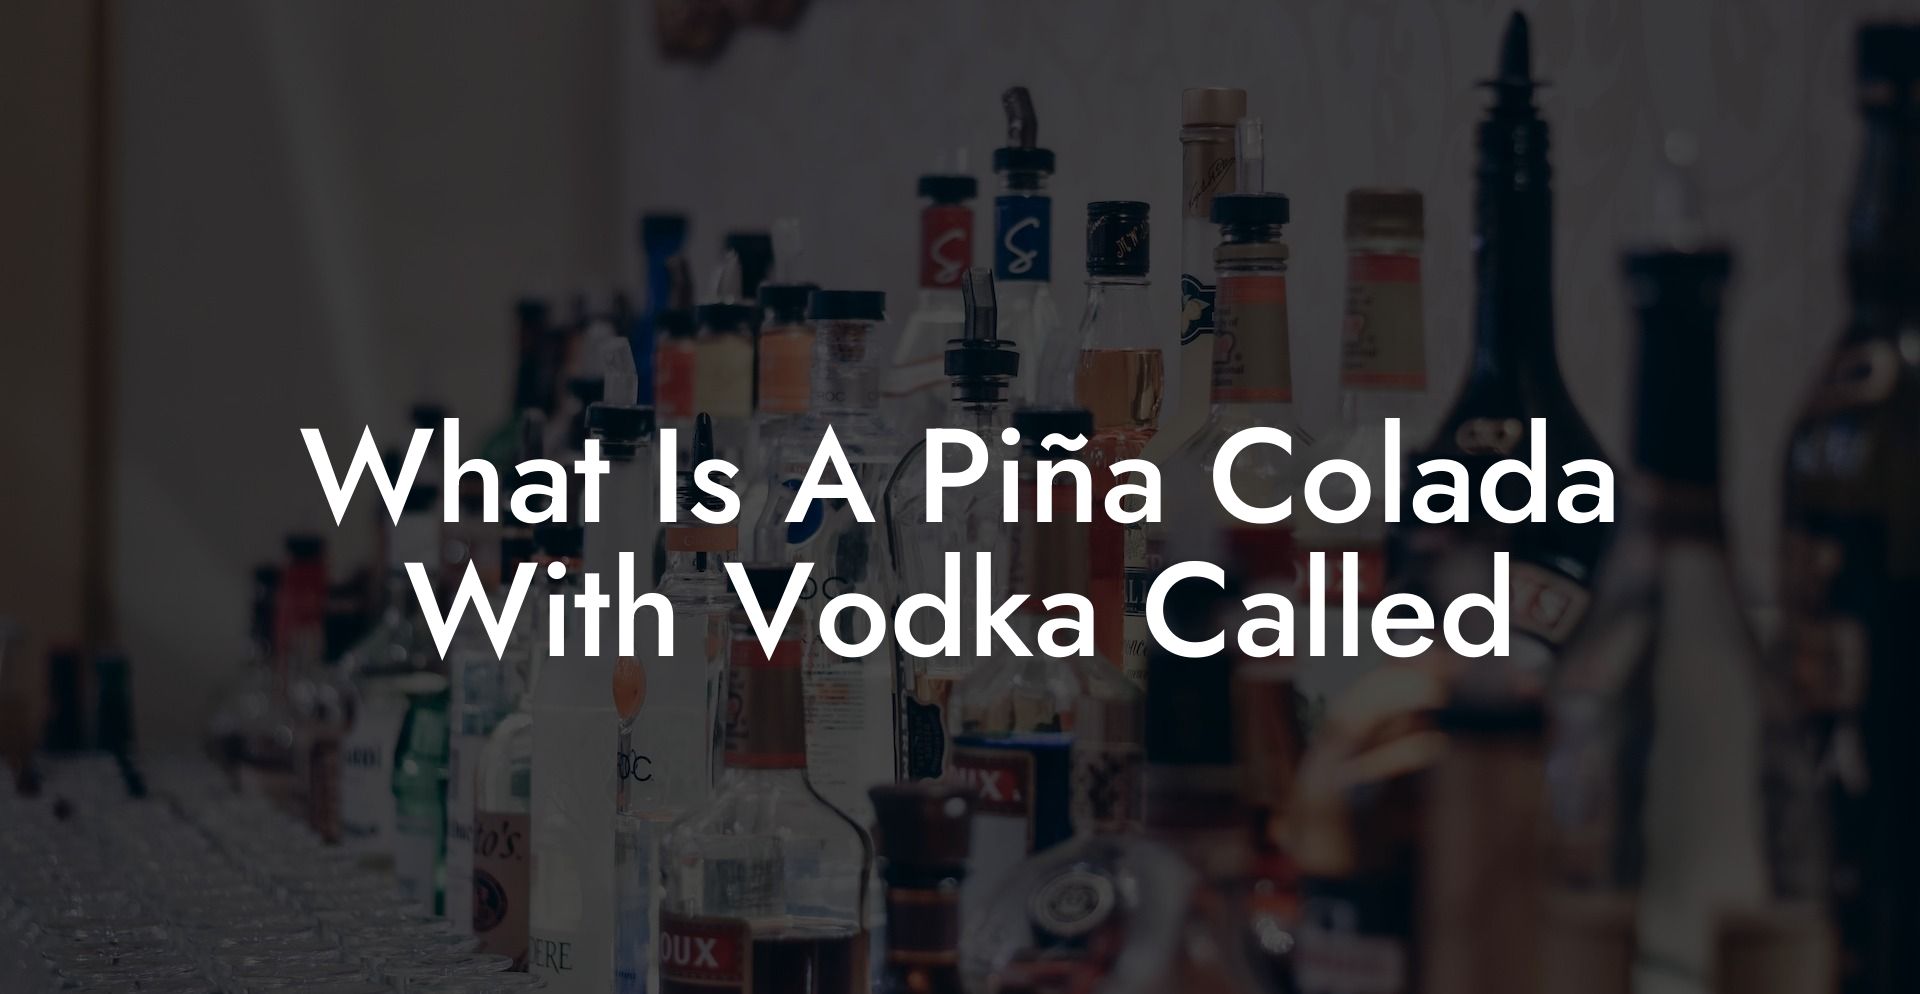 What Is A Piña Colada With Vodka Called